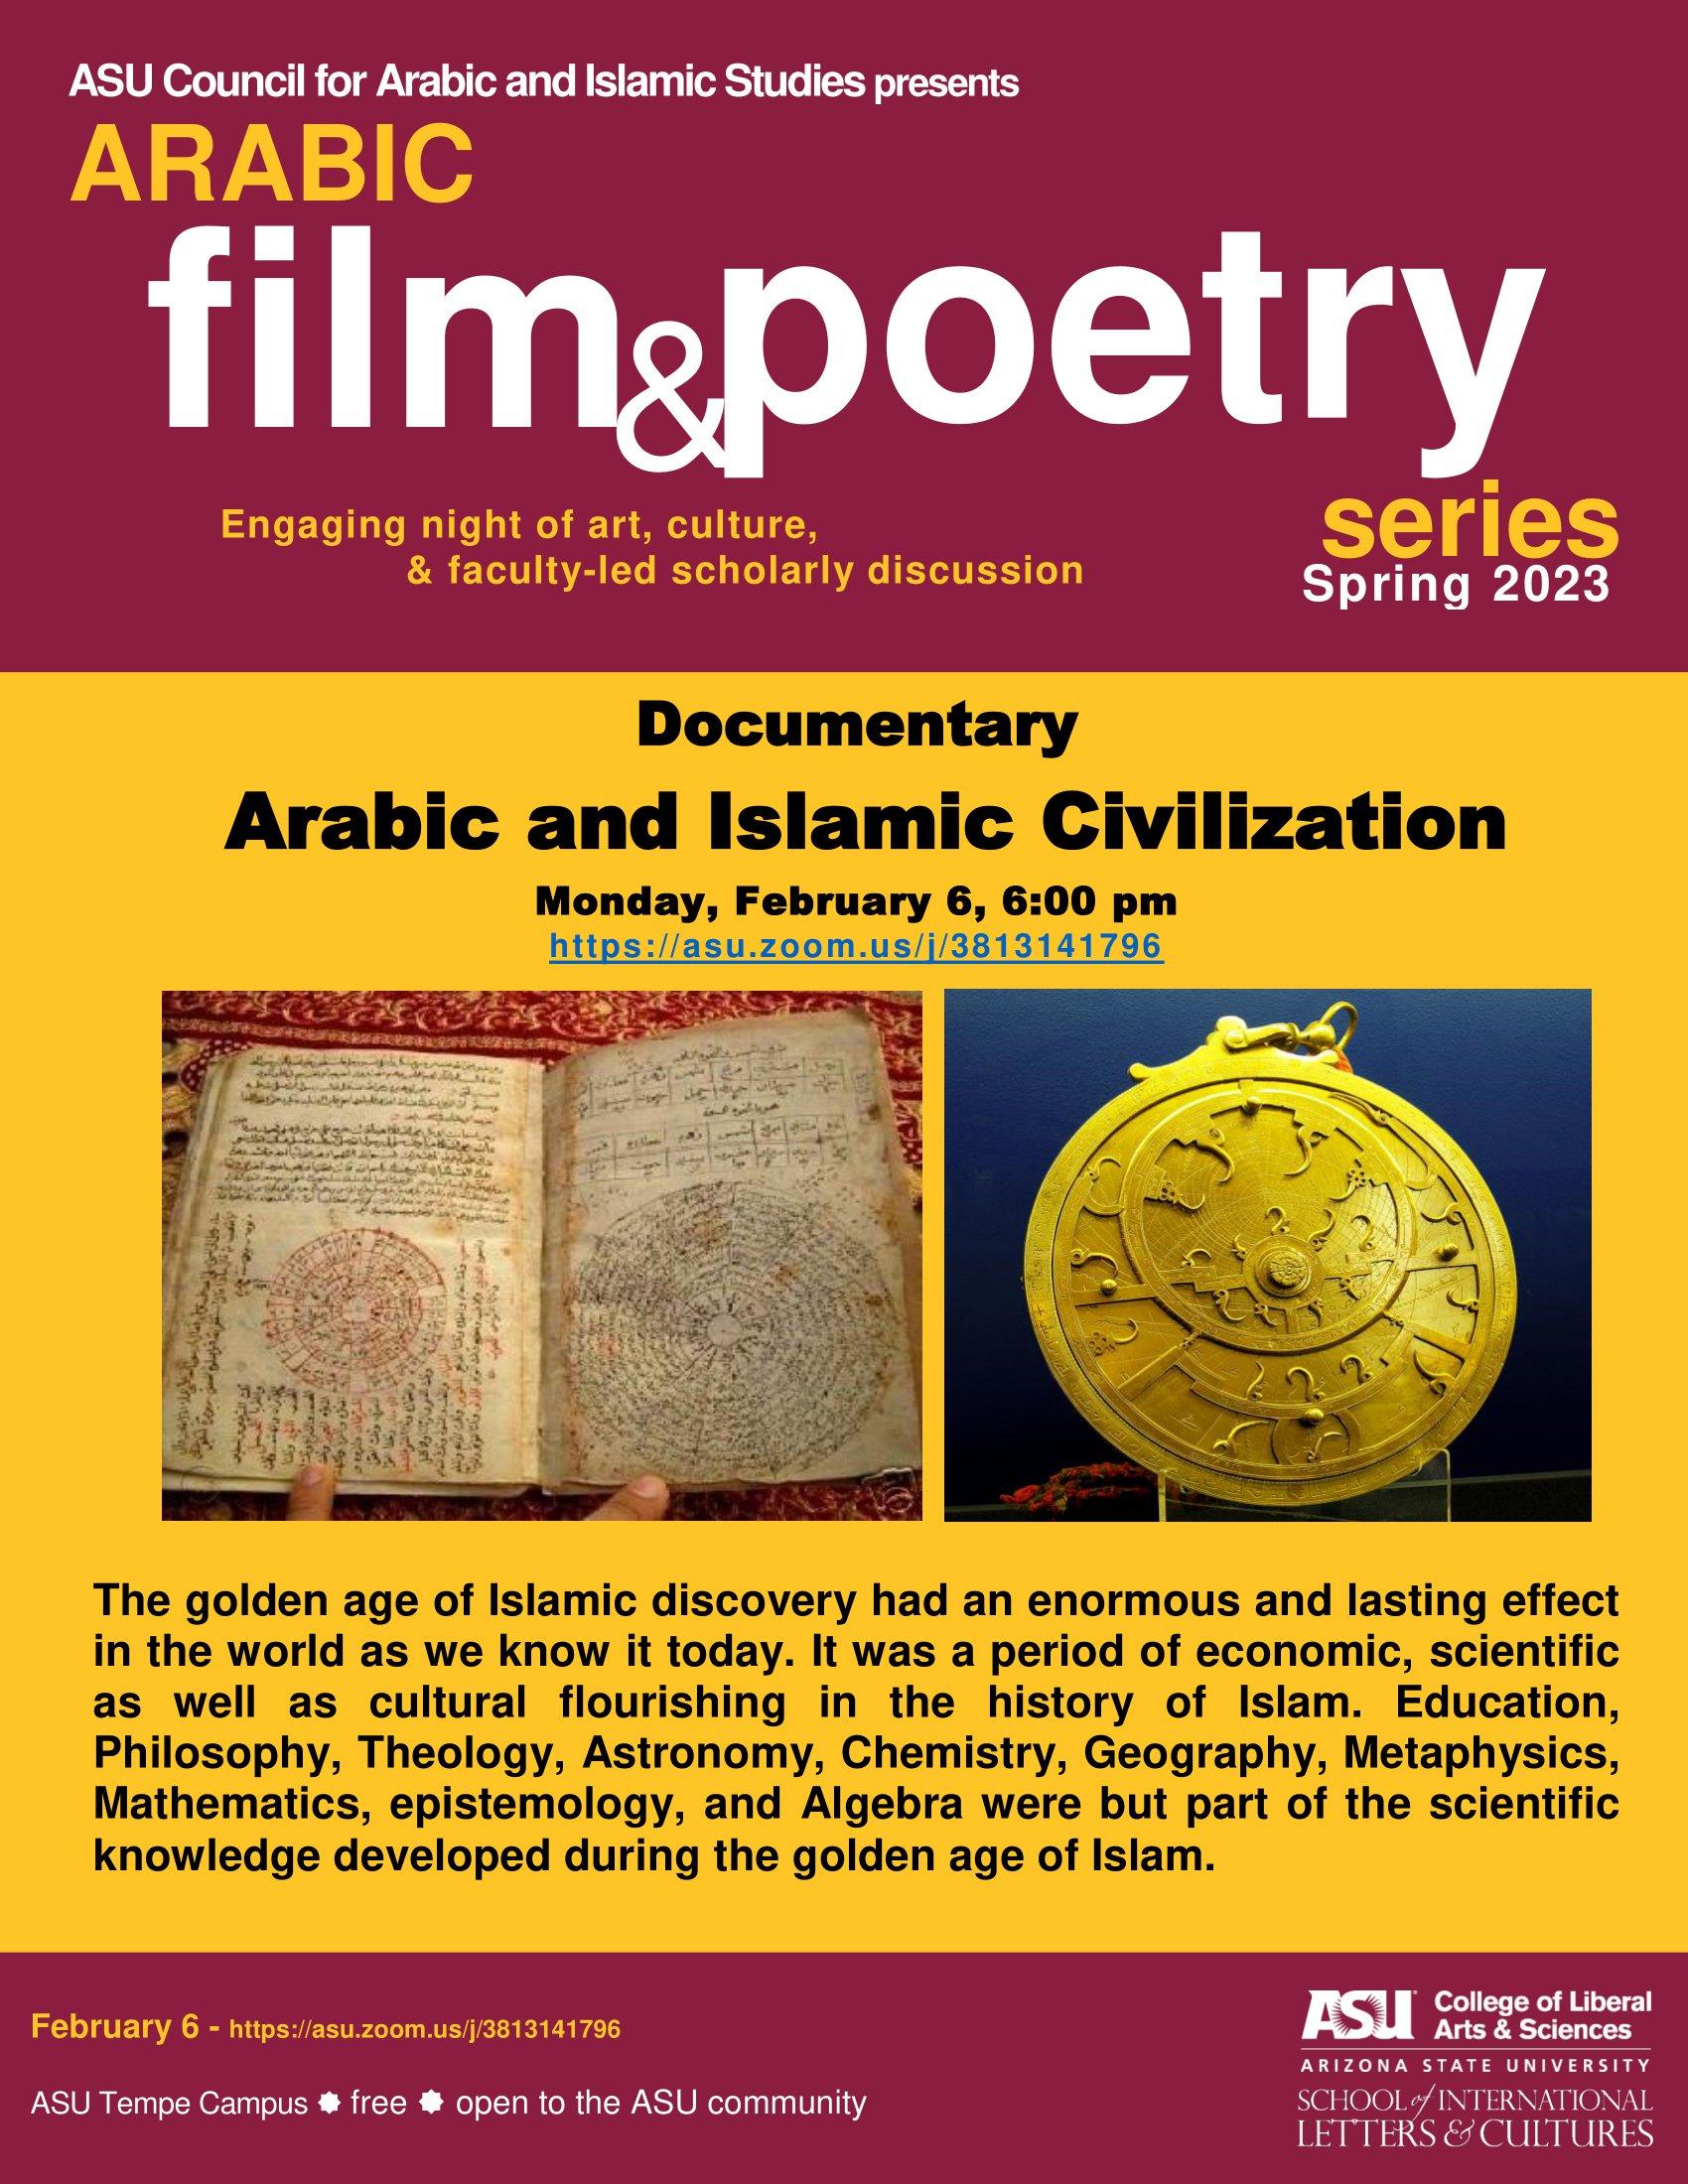 Arabic film and poetry event series spring 2023